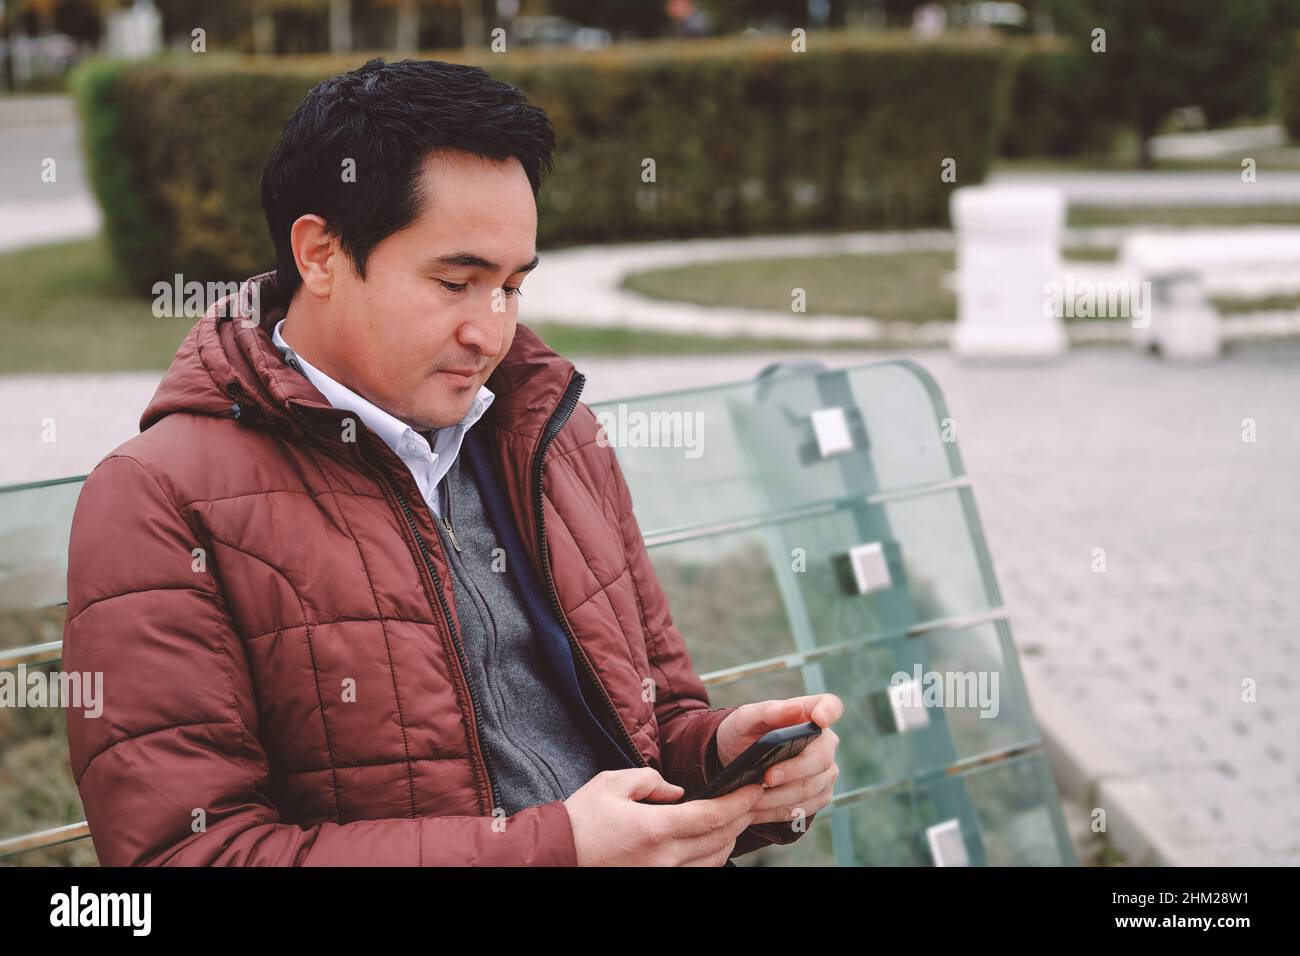 Middle aged asian man sitting on the bench with phone. Stock Photo